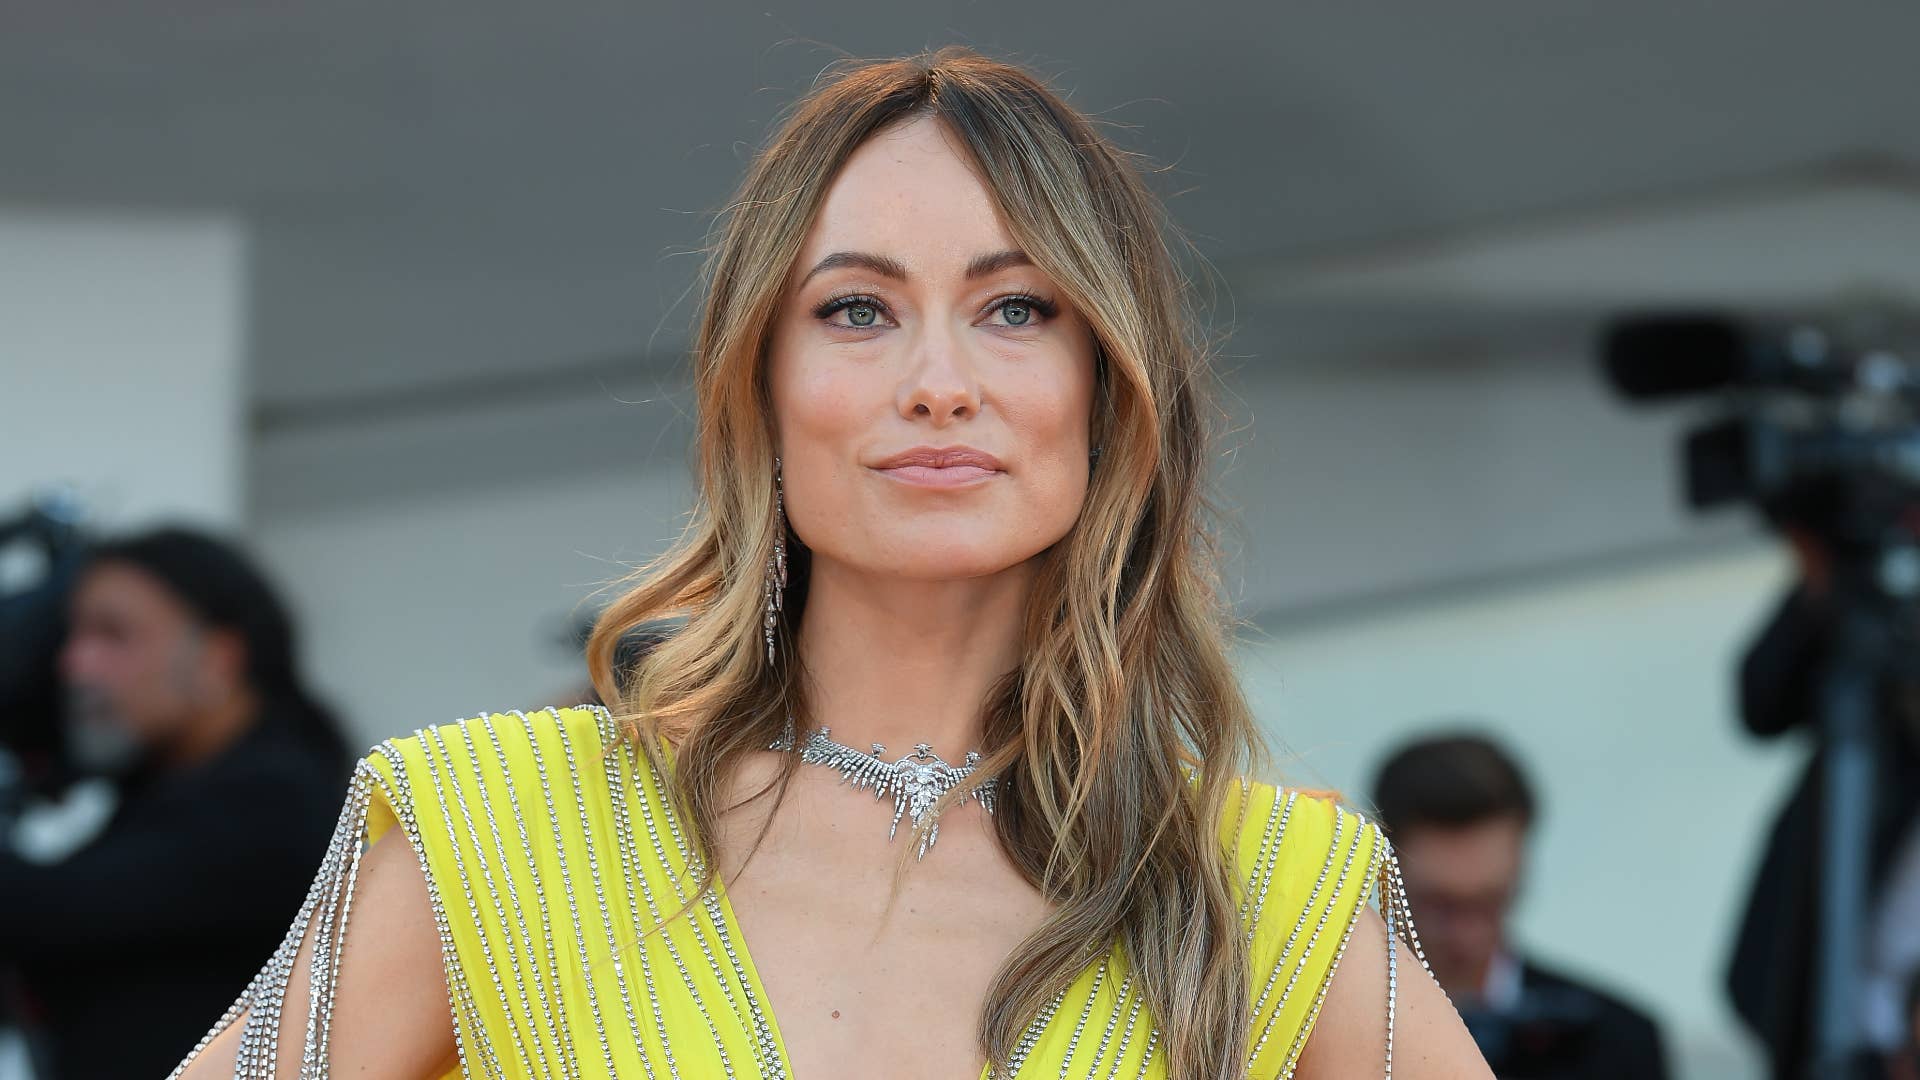 Olivia Wilde is seen at a film festival event